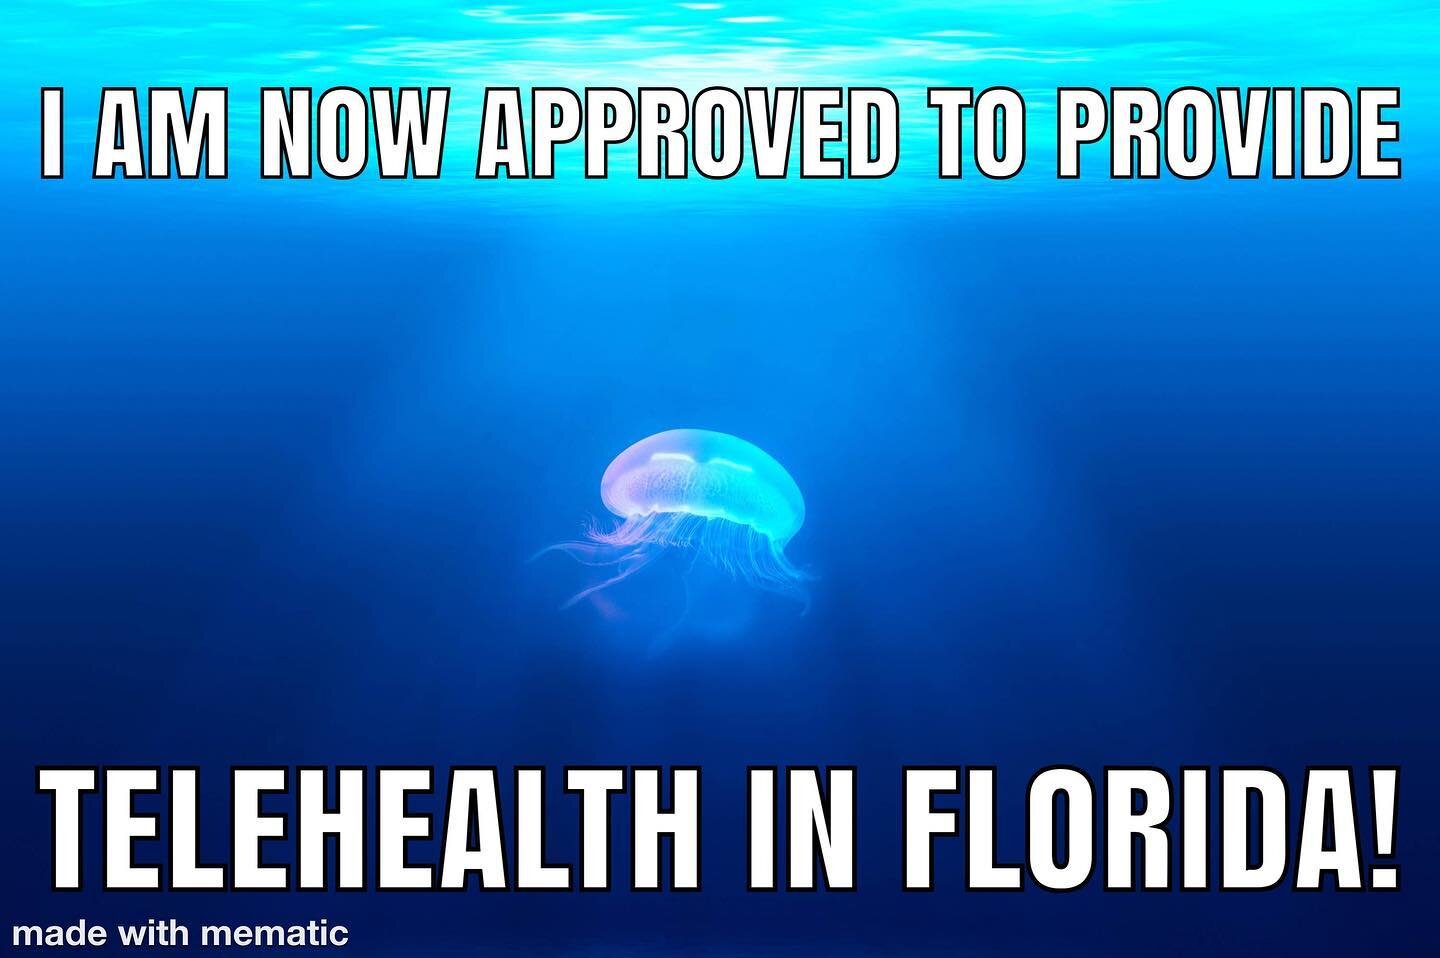 I am so excited to announce that I have been approved to provide tele therapy services in Florida!!! 

I will be accepting new clients from Florida shortly and I am so excited to be able to grow my practice in this way!!